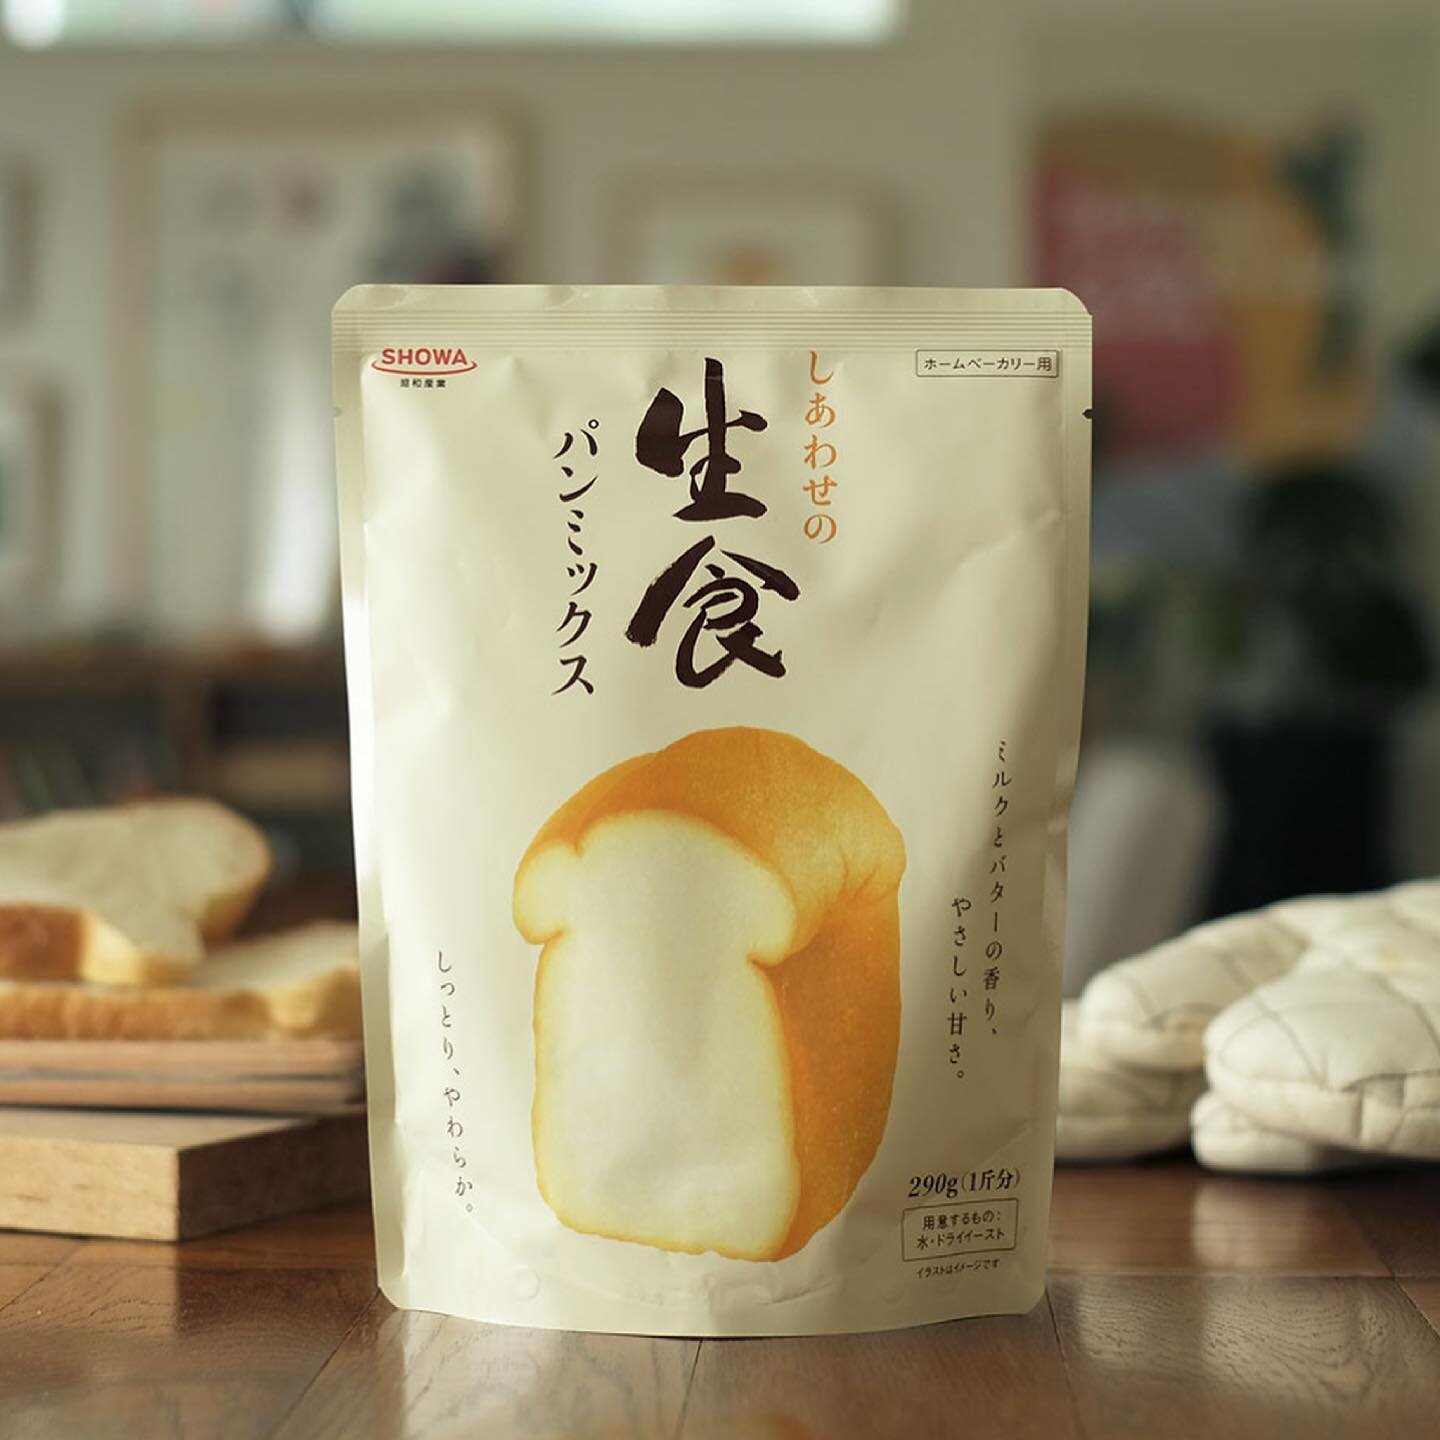 You can now bake Shokupan (Japanese Milk bread) easily at home with Showa's Happy Shokupan Bread pre-mix! 

Photo credit: @mrt_izm 

Increasingly popular in Melbourne's cafes and bakeries, Shokupan is known for its soft texture and subtle sweetness. 